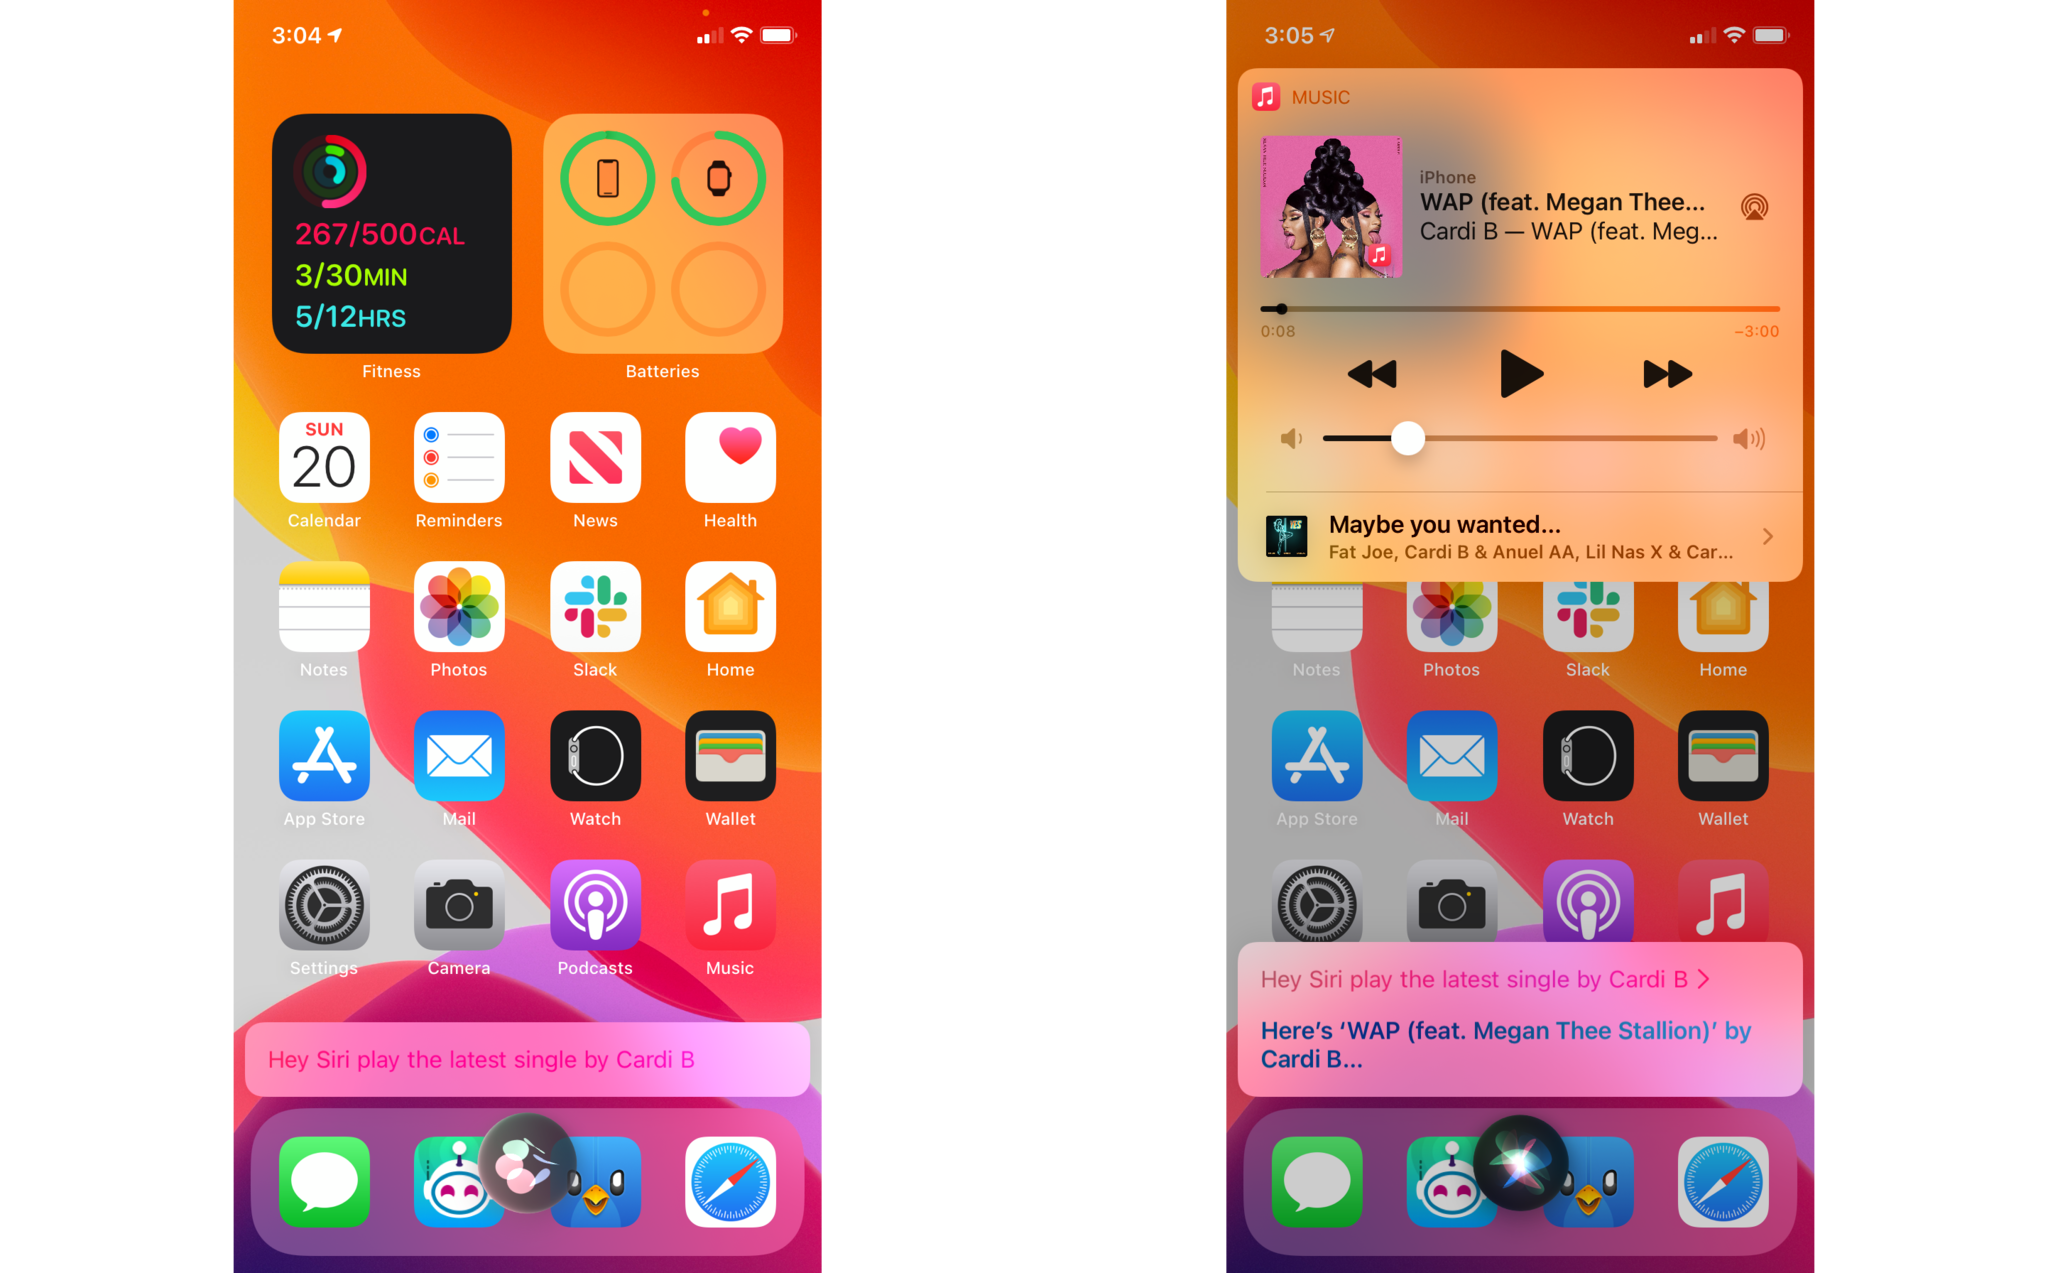 How to use Siri to find and listen to music on HomePod and HomePod mini by showing steps on an iPhone: Give a command like 